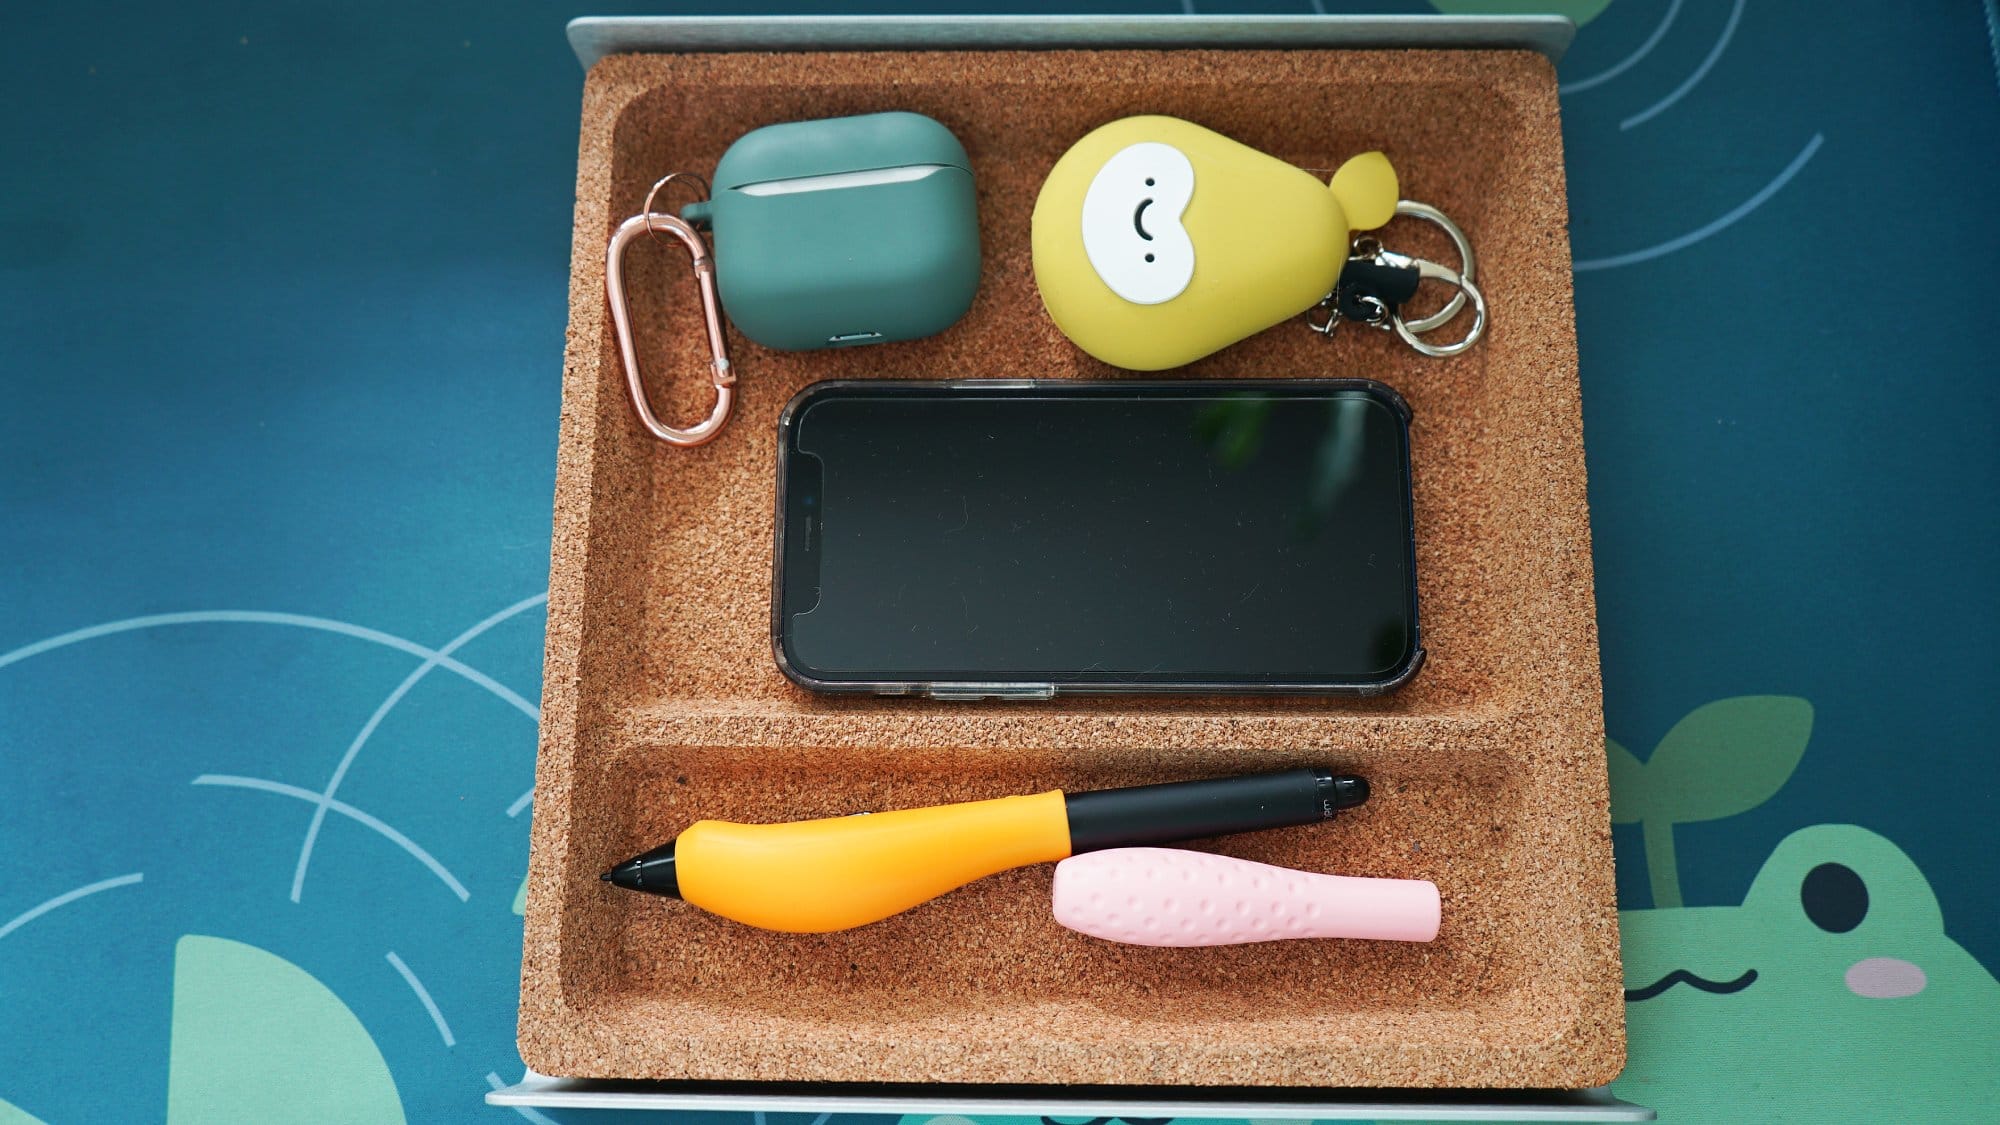  A cork desk organiser holding a smartphone, wireless earbuds case, a keychain with a cute character, and two pens, on a blue desk mat